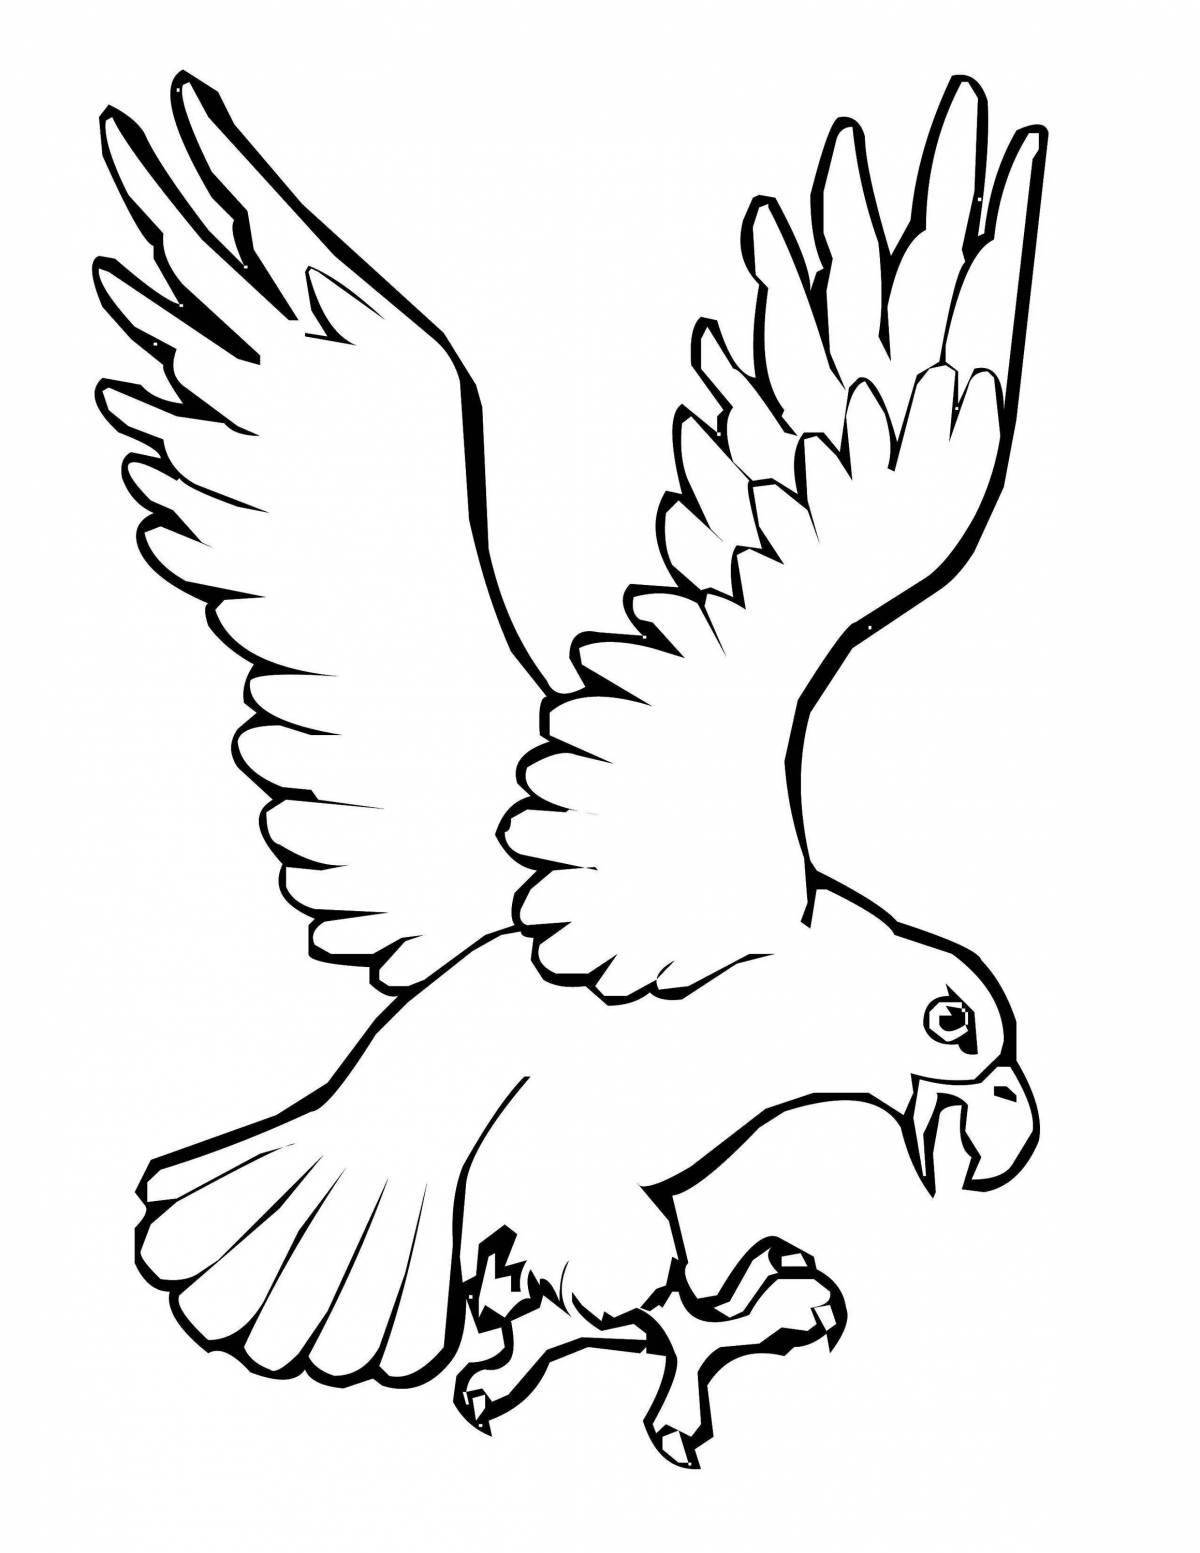 Glamorous eagle coloring page